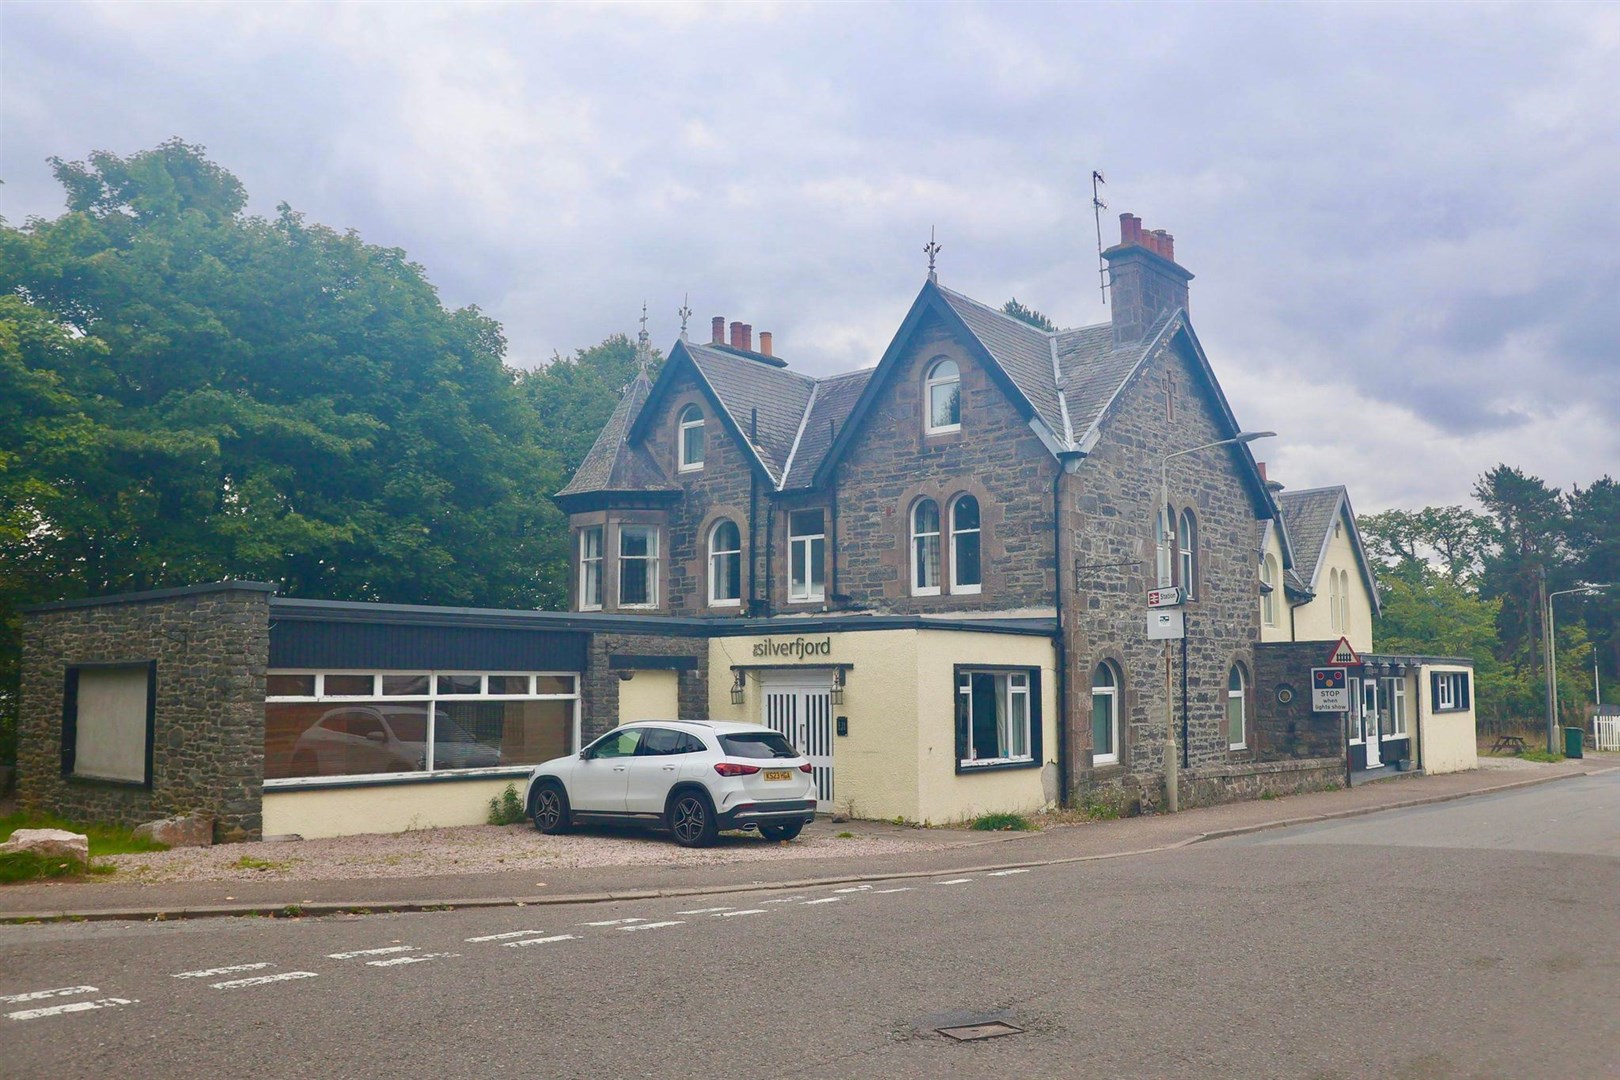 For sale: the Silverfjord Hotel, Kingussie.